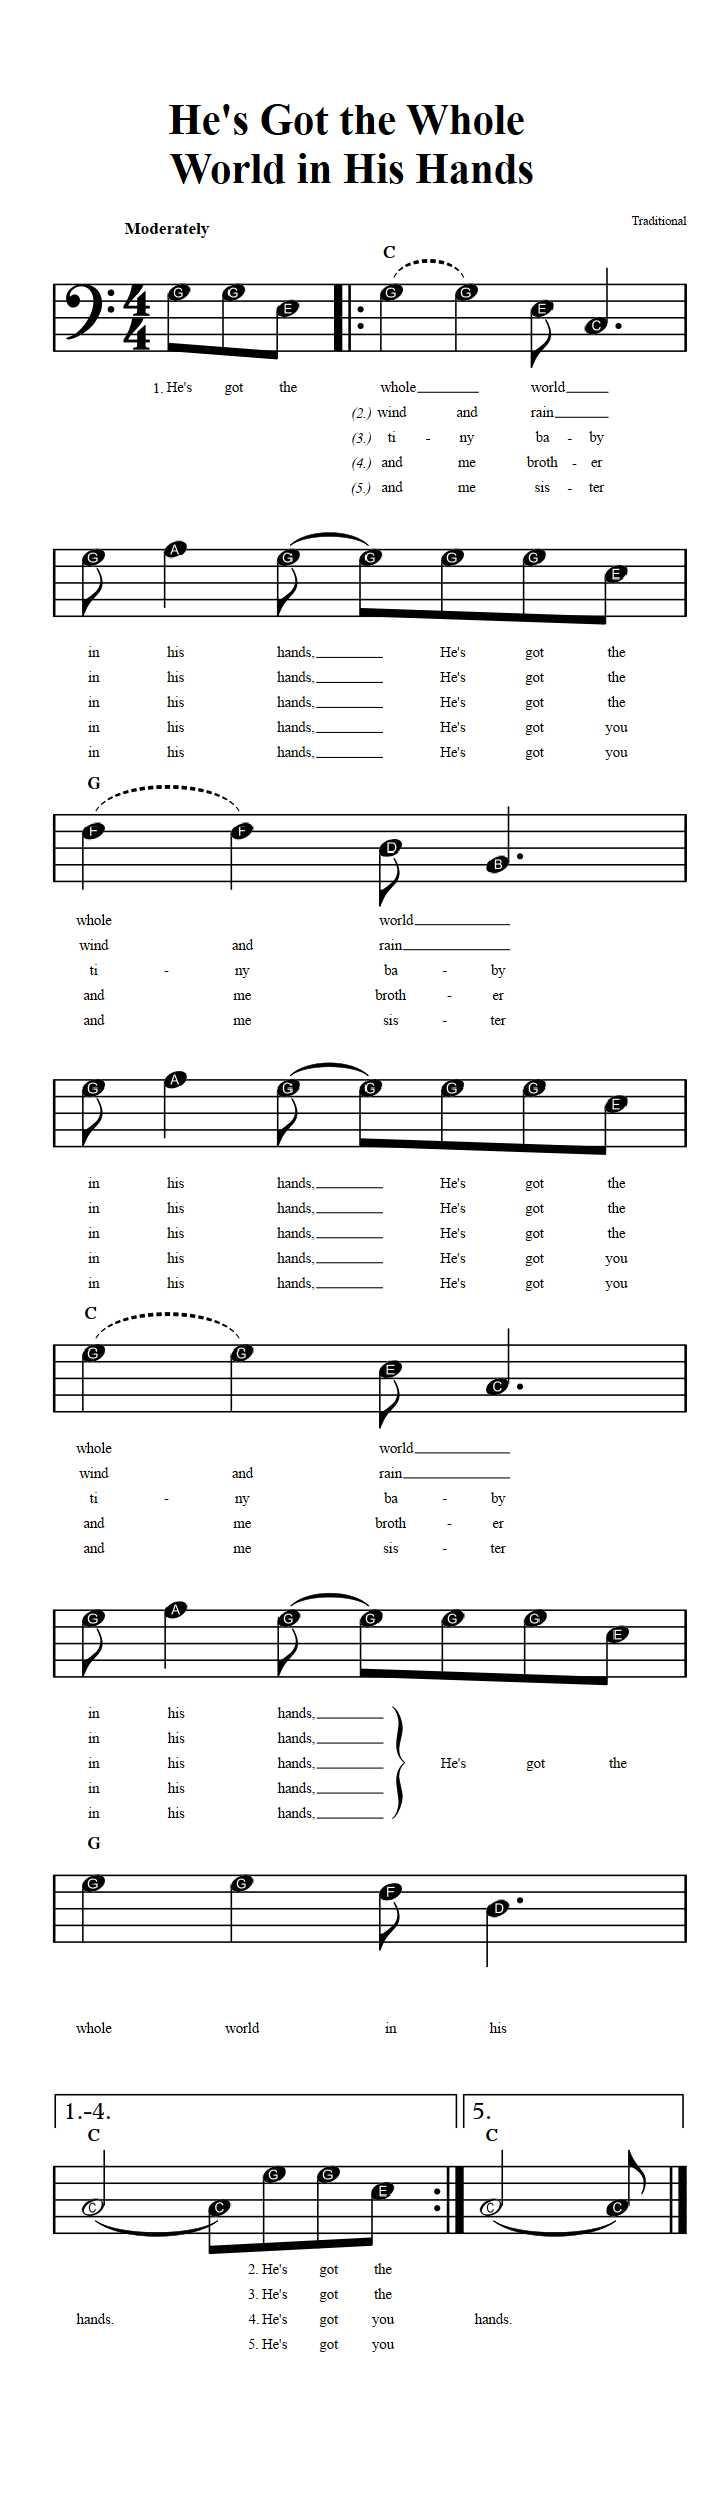 He's Got the Whole World in His Hands  Beginner Bass Clef Sheet Music